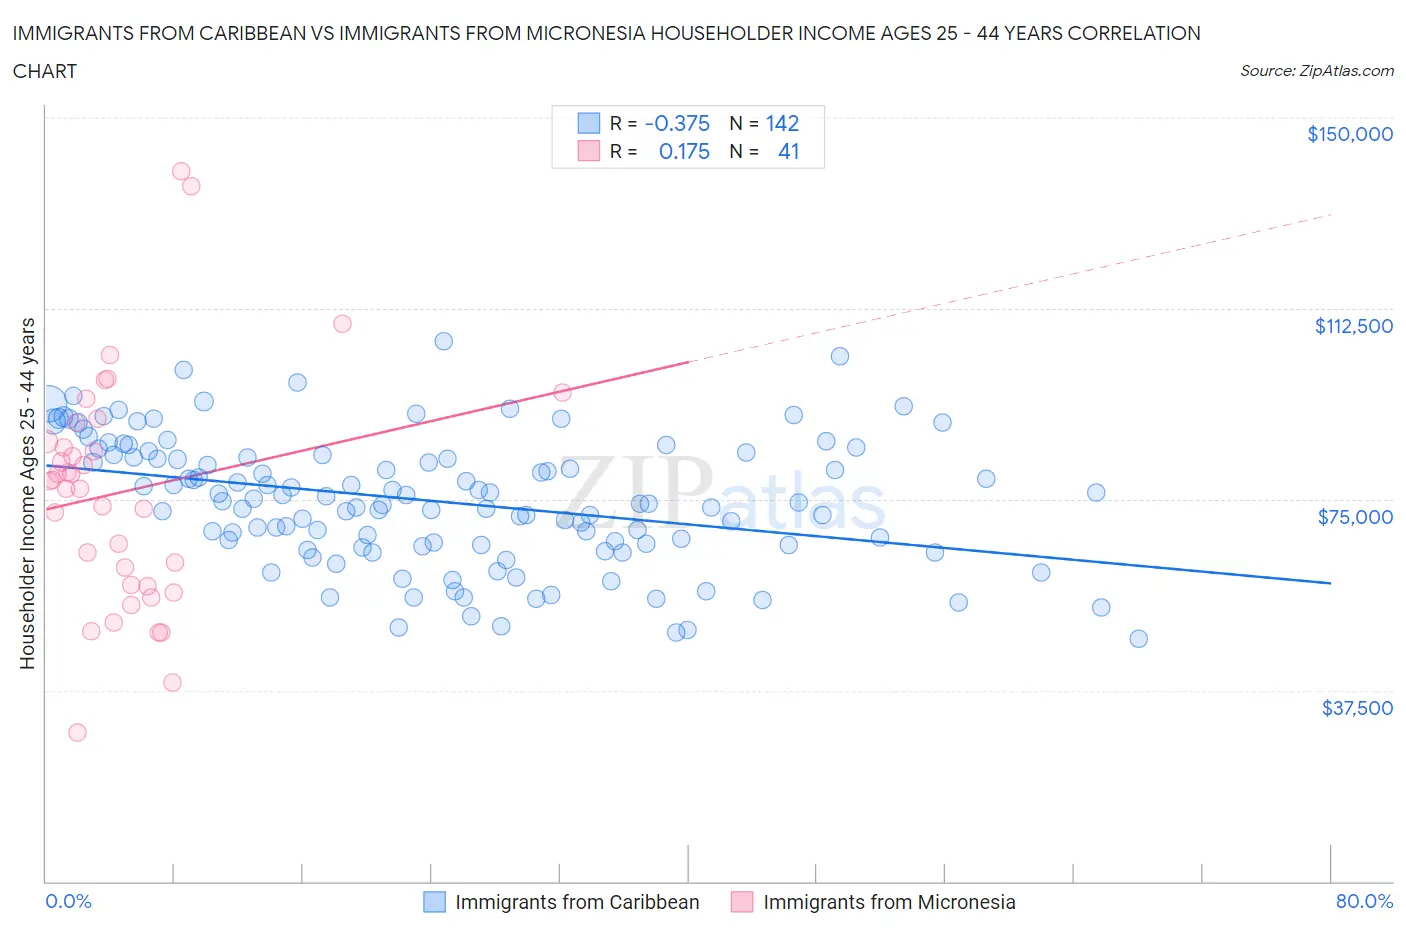 Immigrants from Caribbean vs Immigrants from Micronesia Householder Income Ages 25 - 44 years